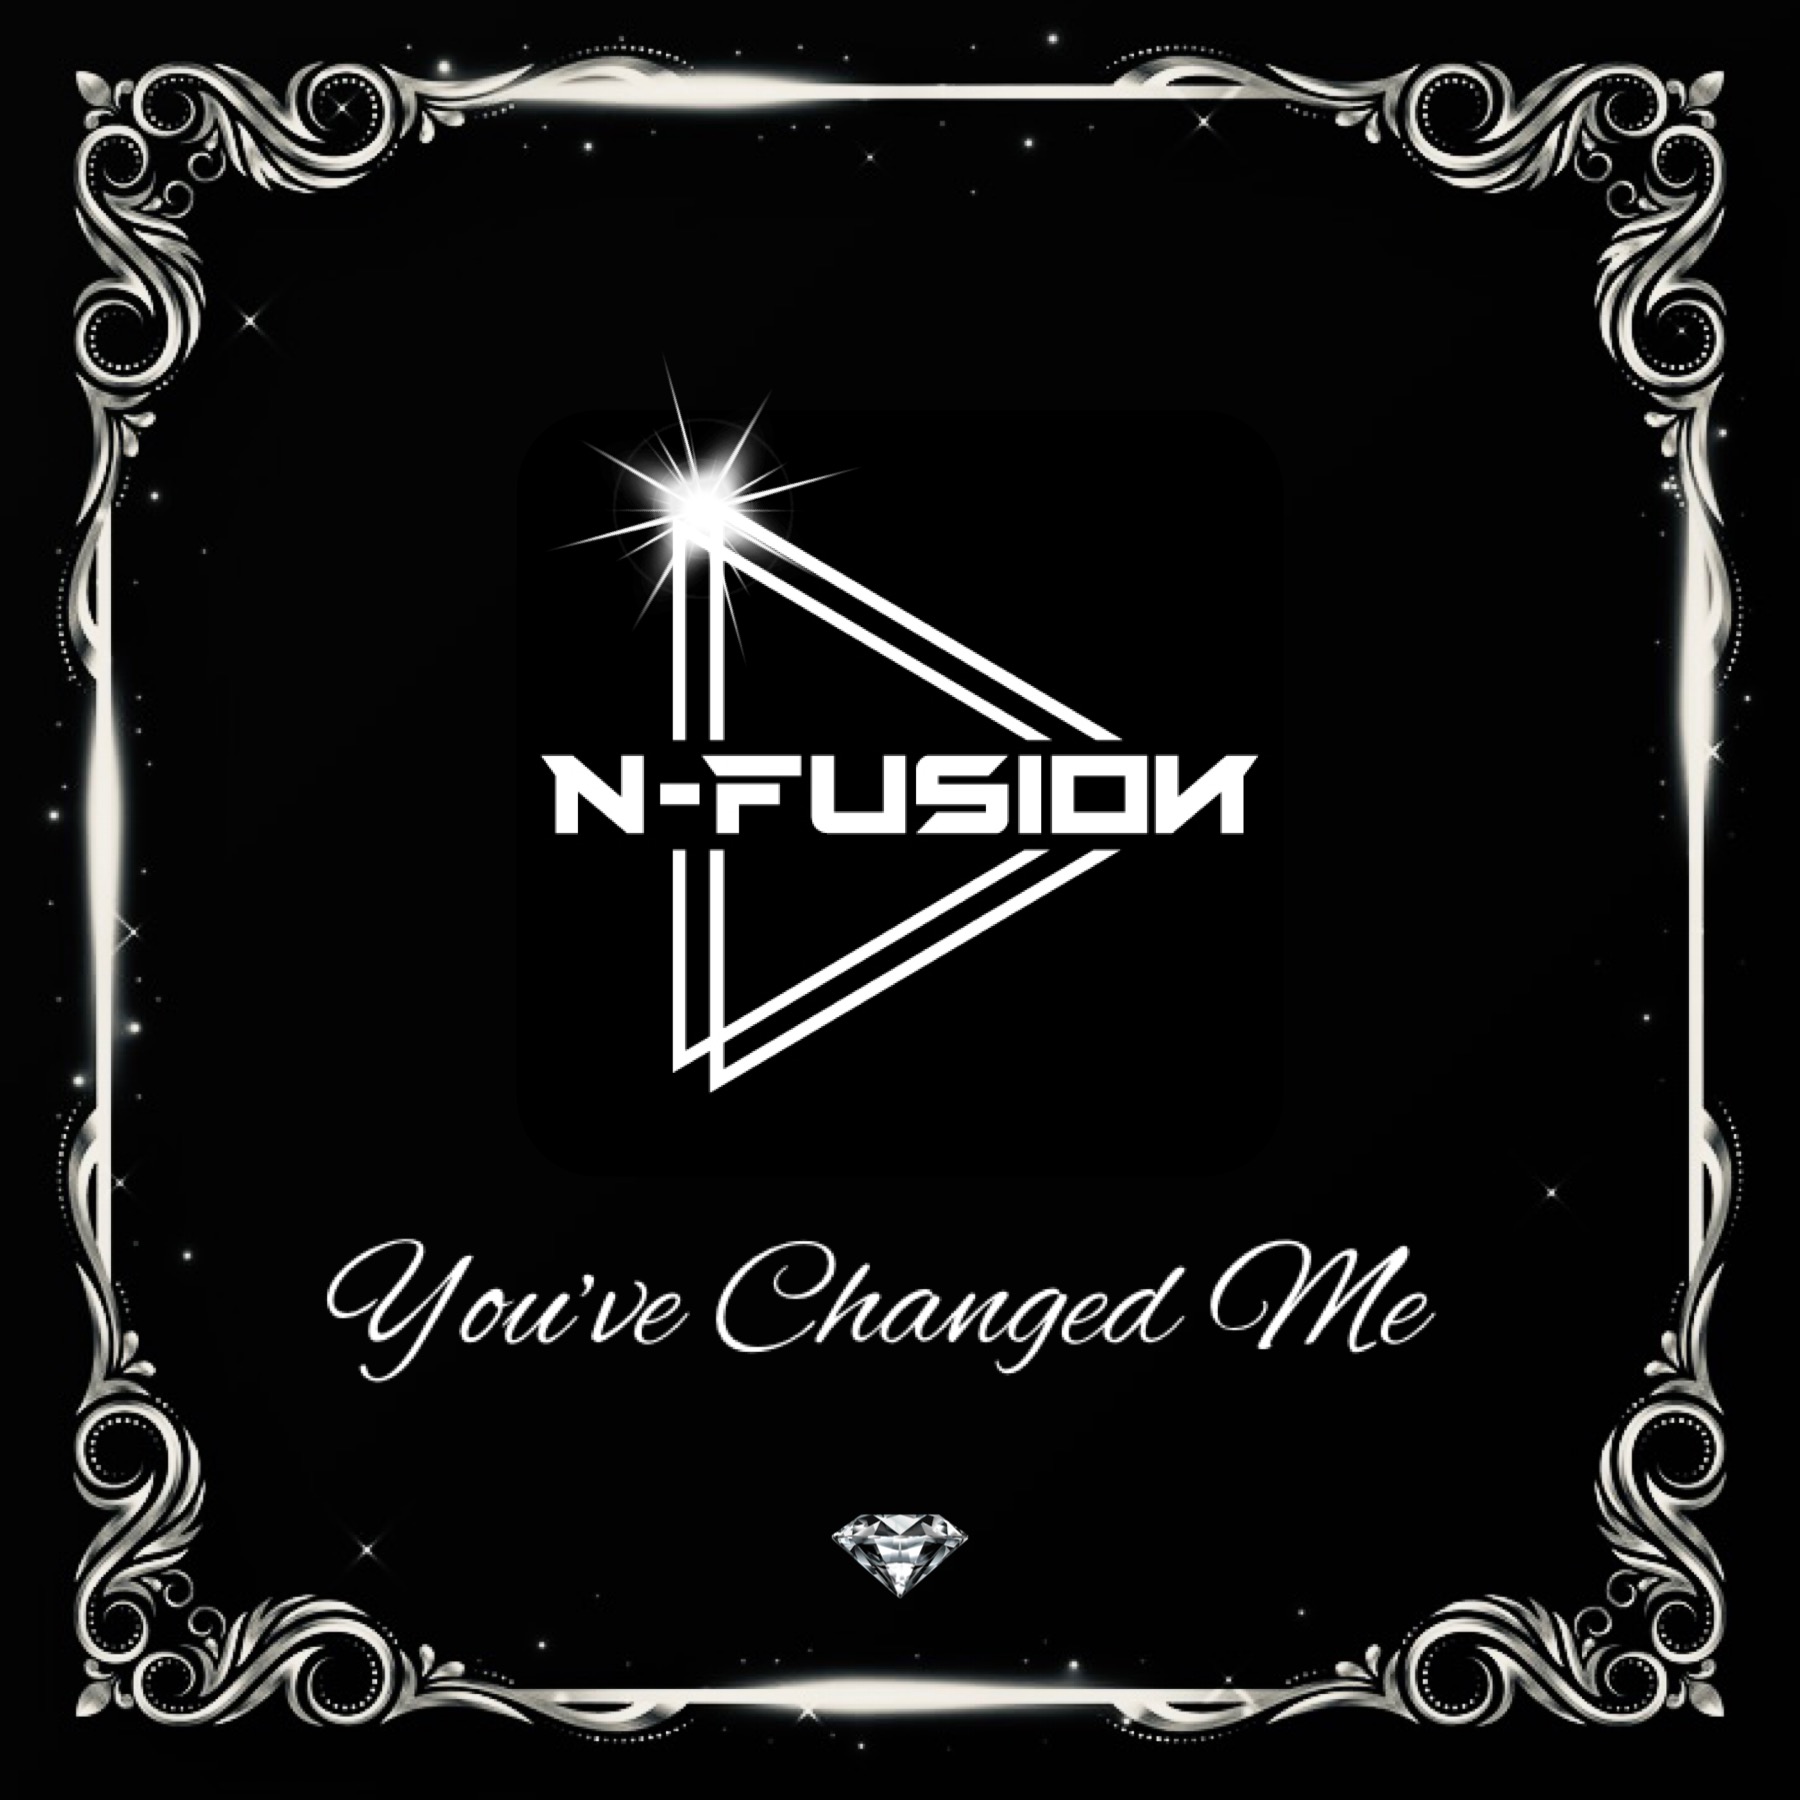 N-Fusion You've Changed Me